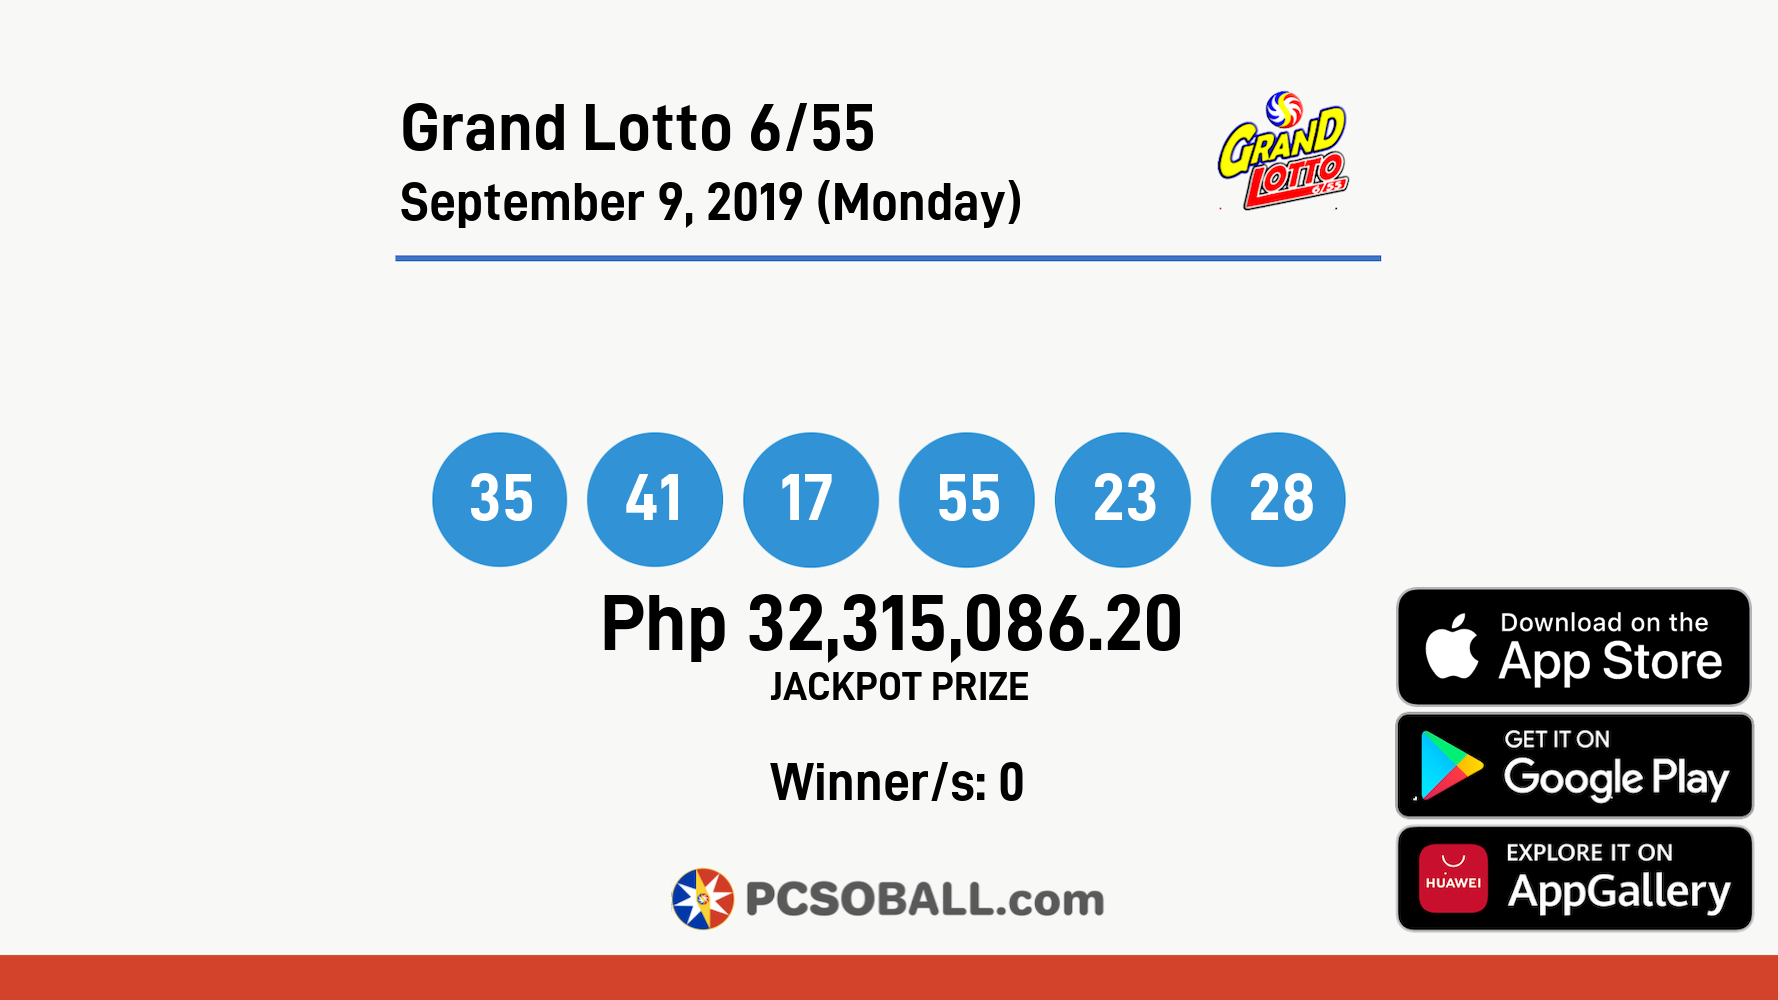 Grand Lotto 6/55 September 9, 2019 (Monday) Result